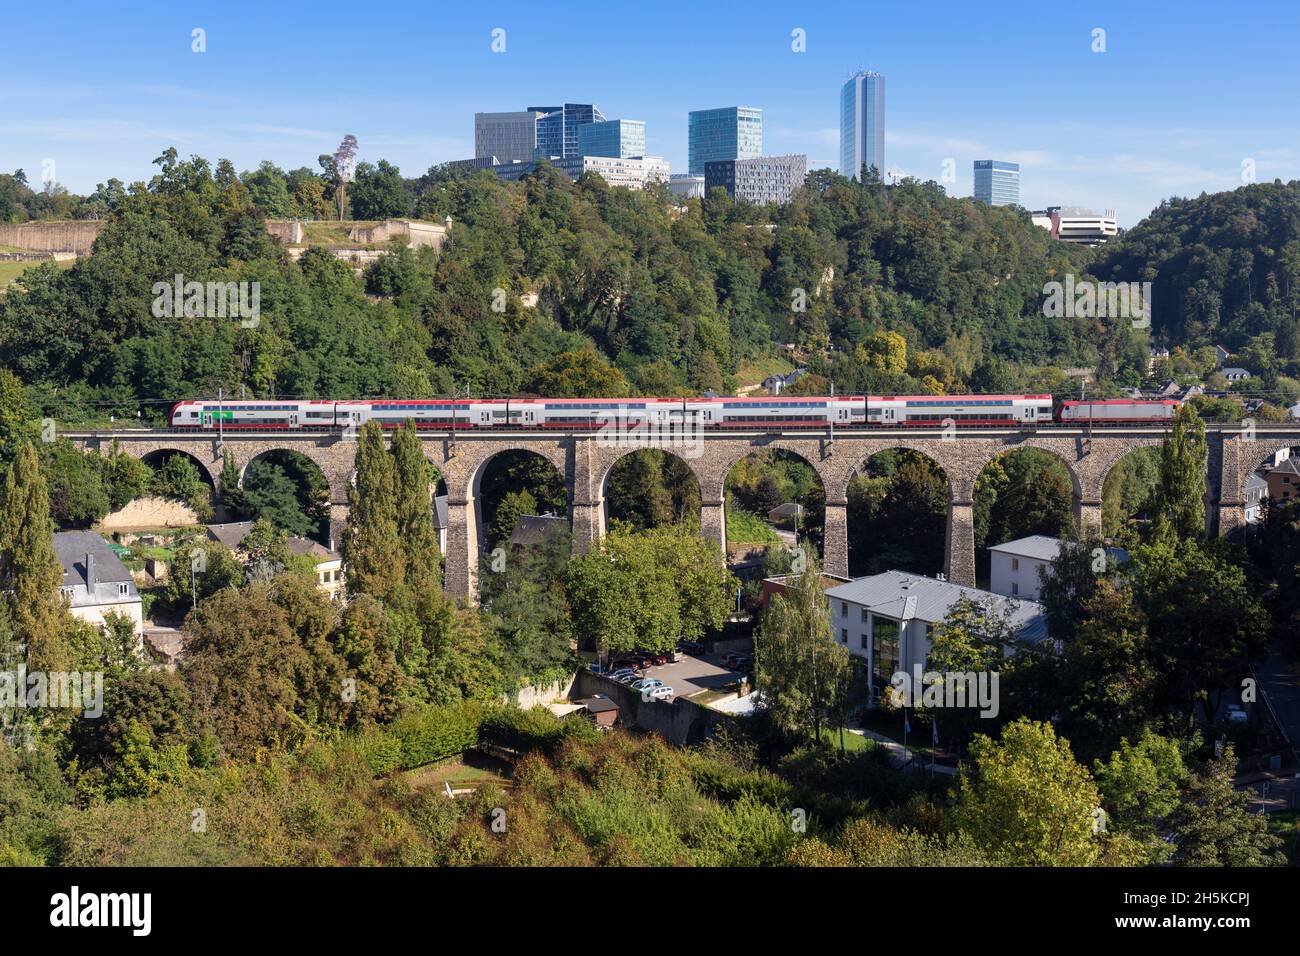 Europe, Luxembourg, Luxembourg City, Pafendall, Views of the Kirchberg with Viaduct carrying an Express Passenger Train across the Alzette River Stock Photo